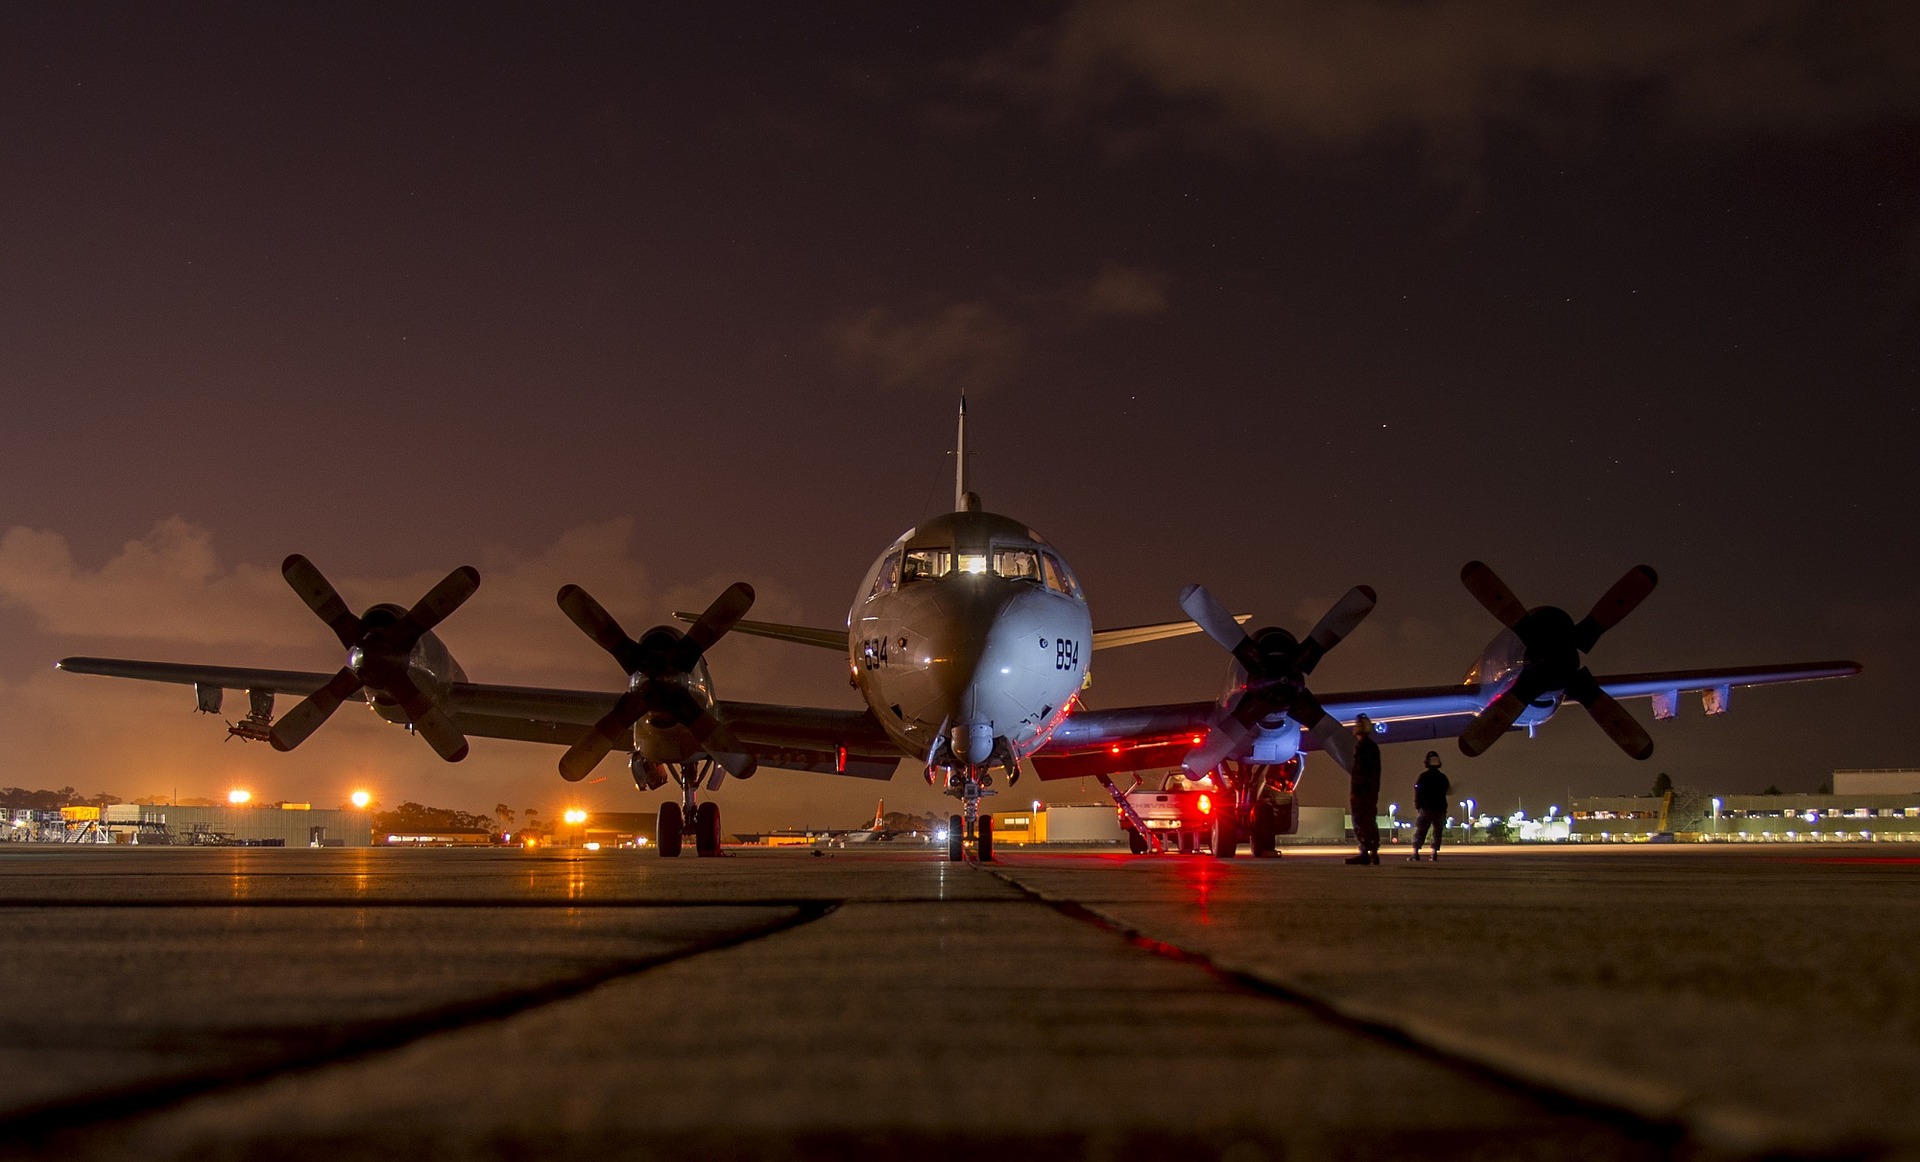 Plane on a runway at night.